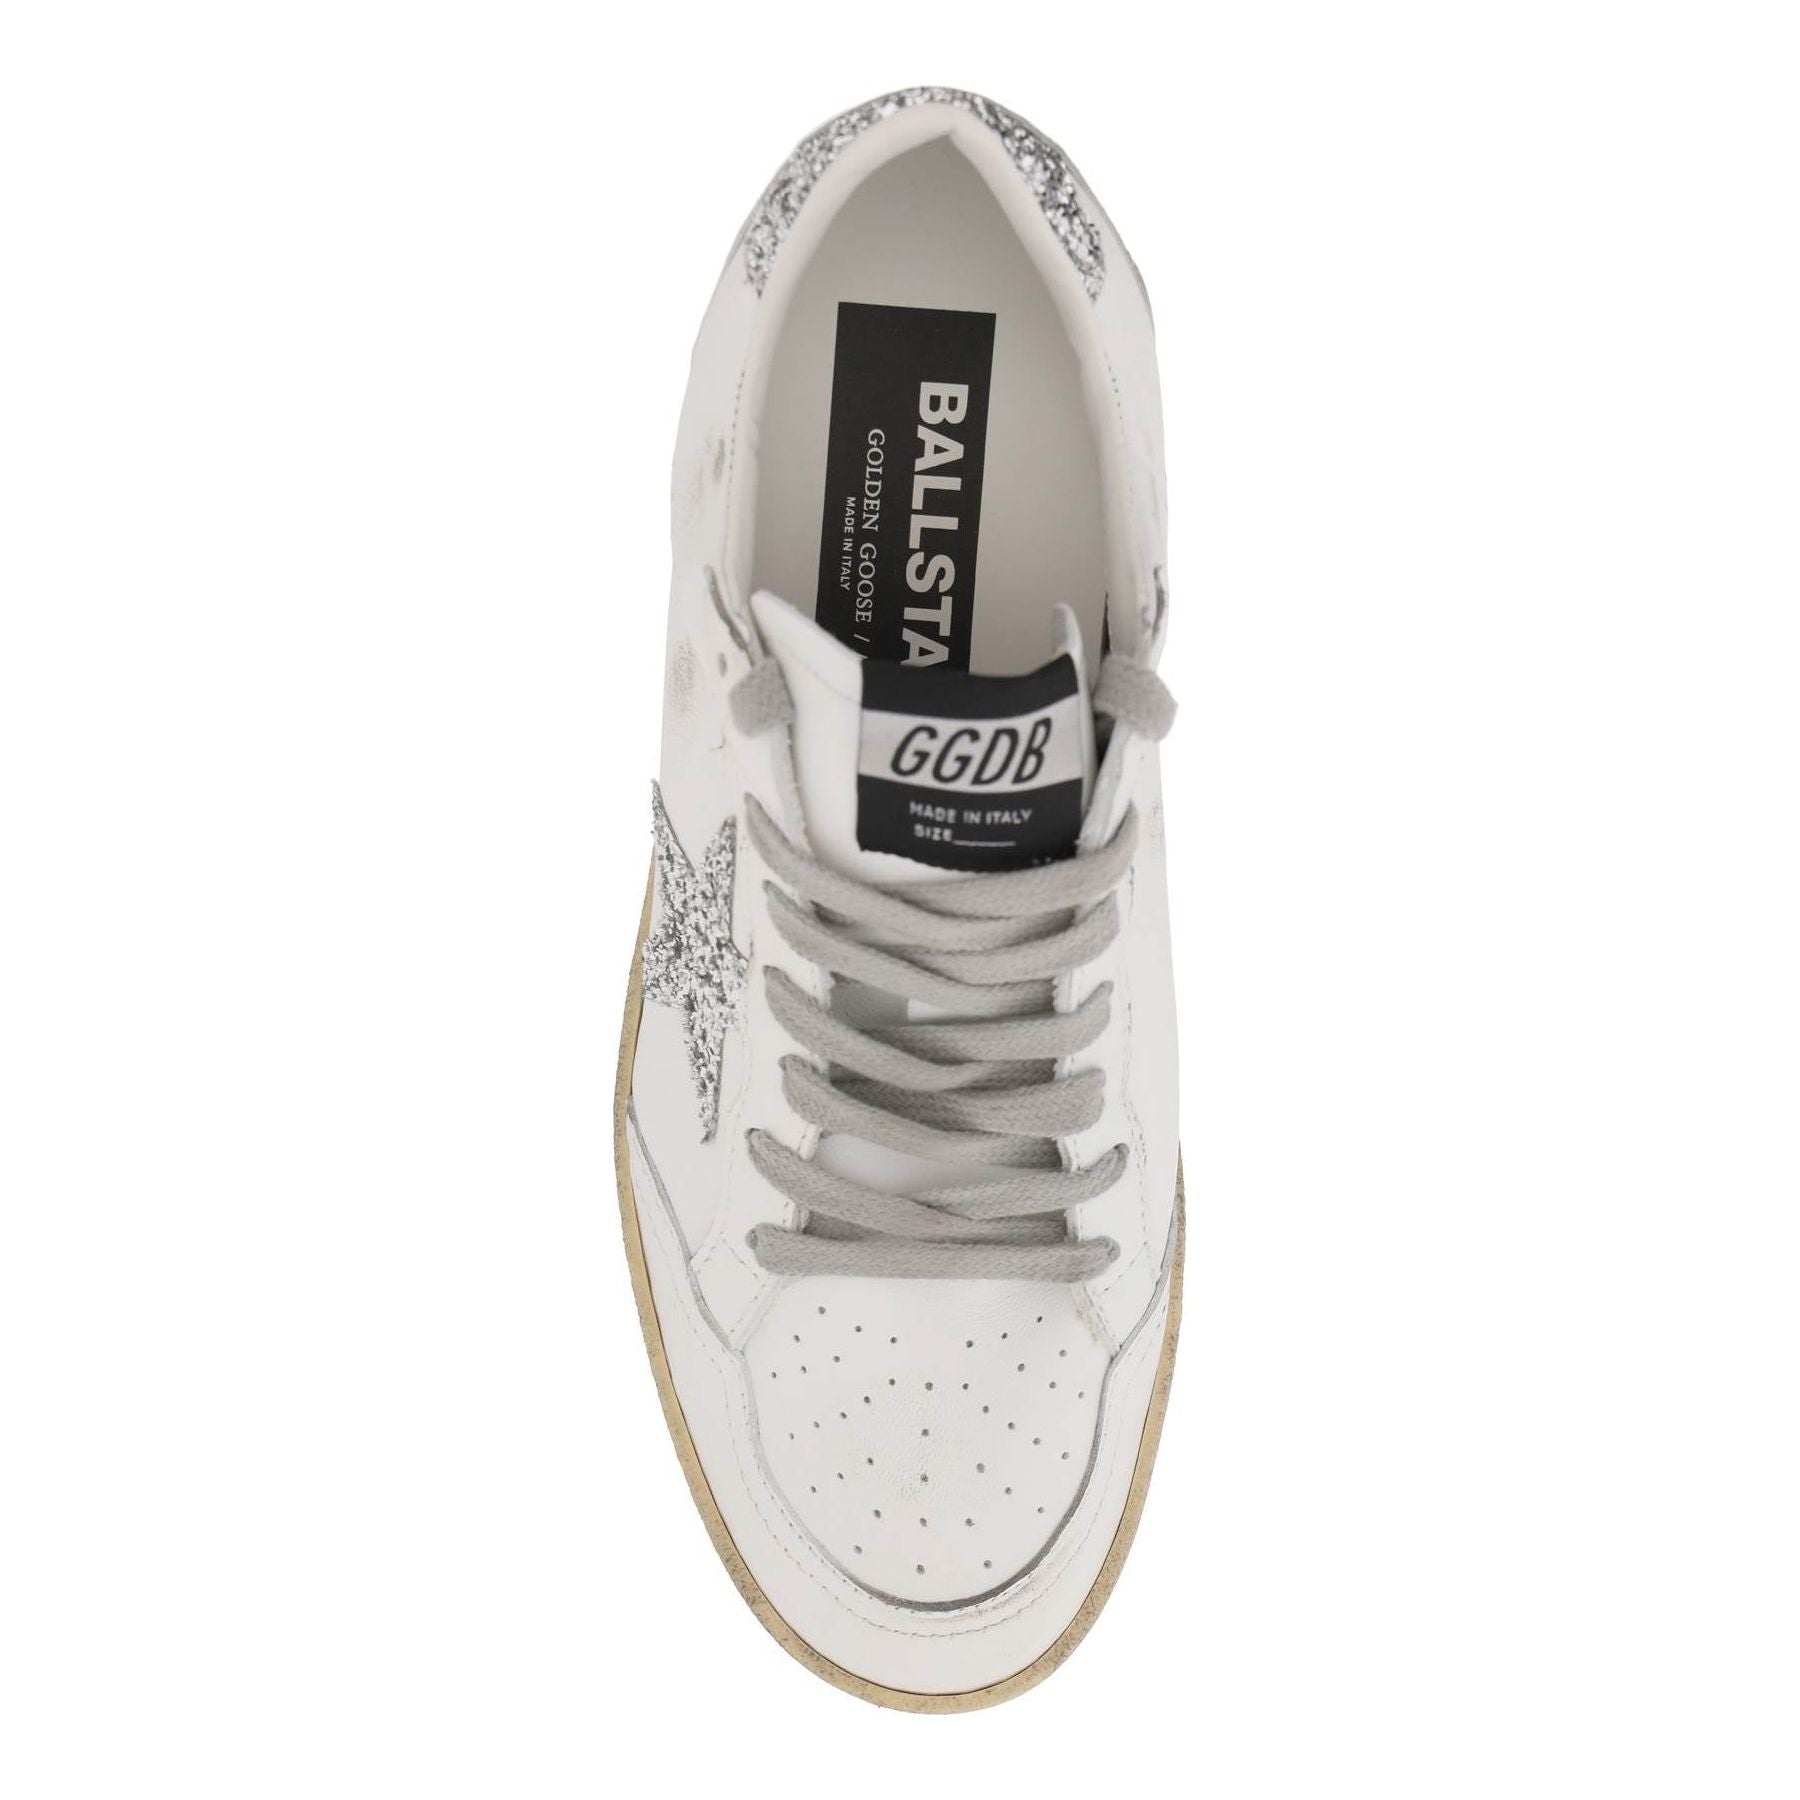 Ball Star Glitter and Leather Sneakers